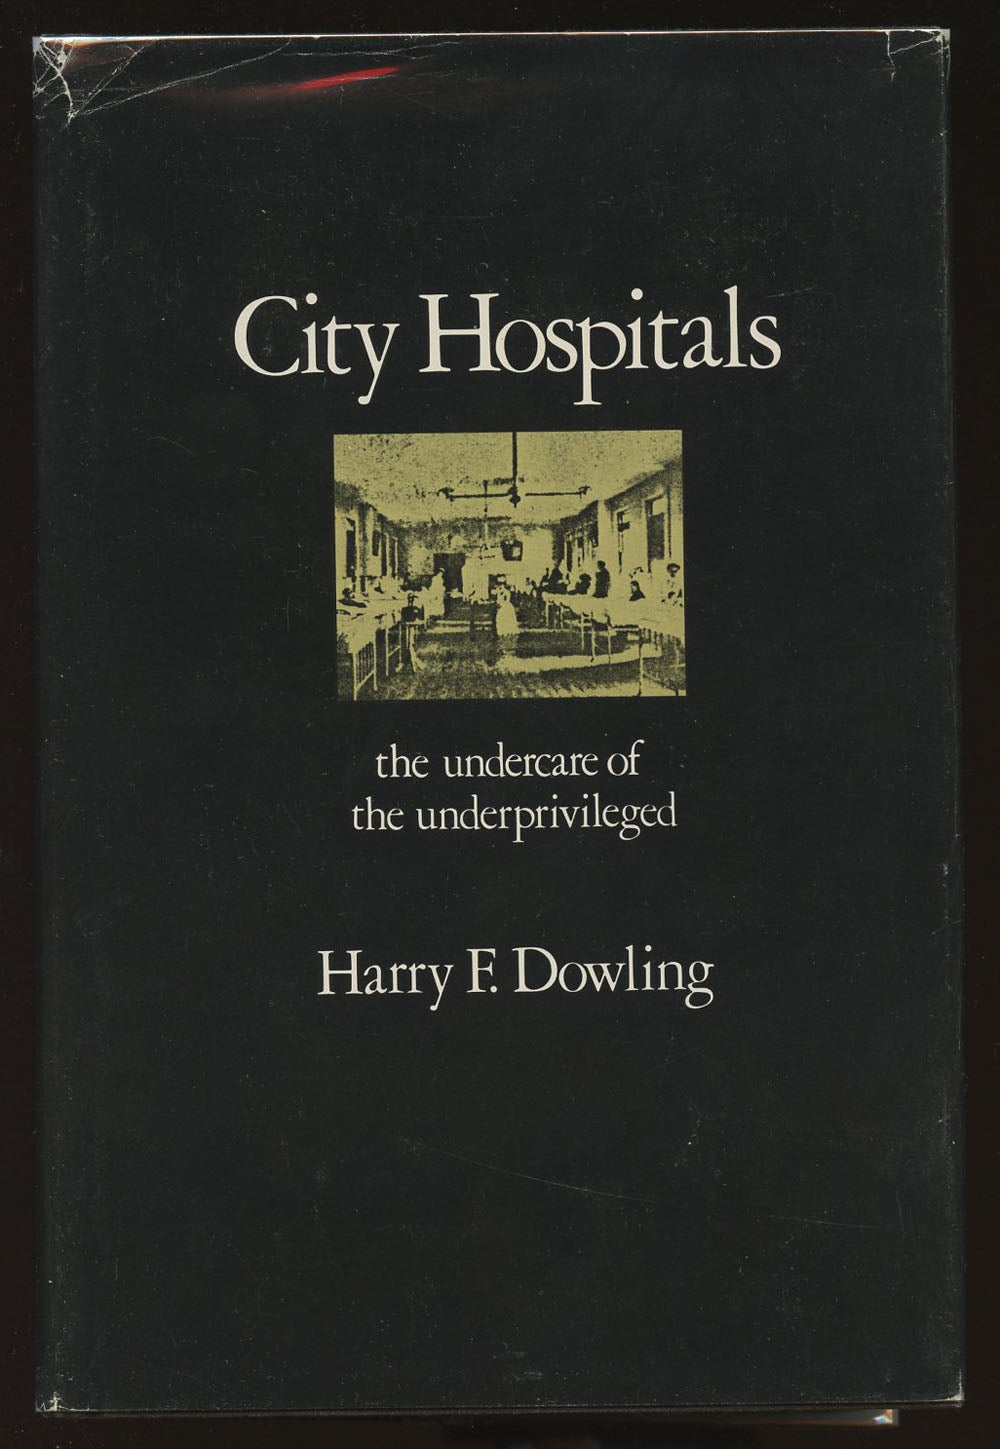 City Hospitals: The Undercare of the Underprivileged, Harry F. Dowling